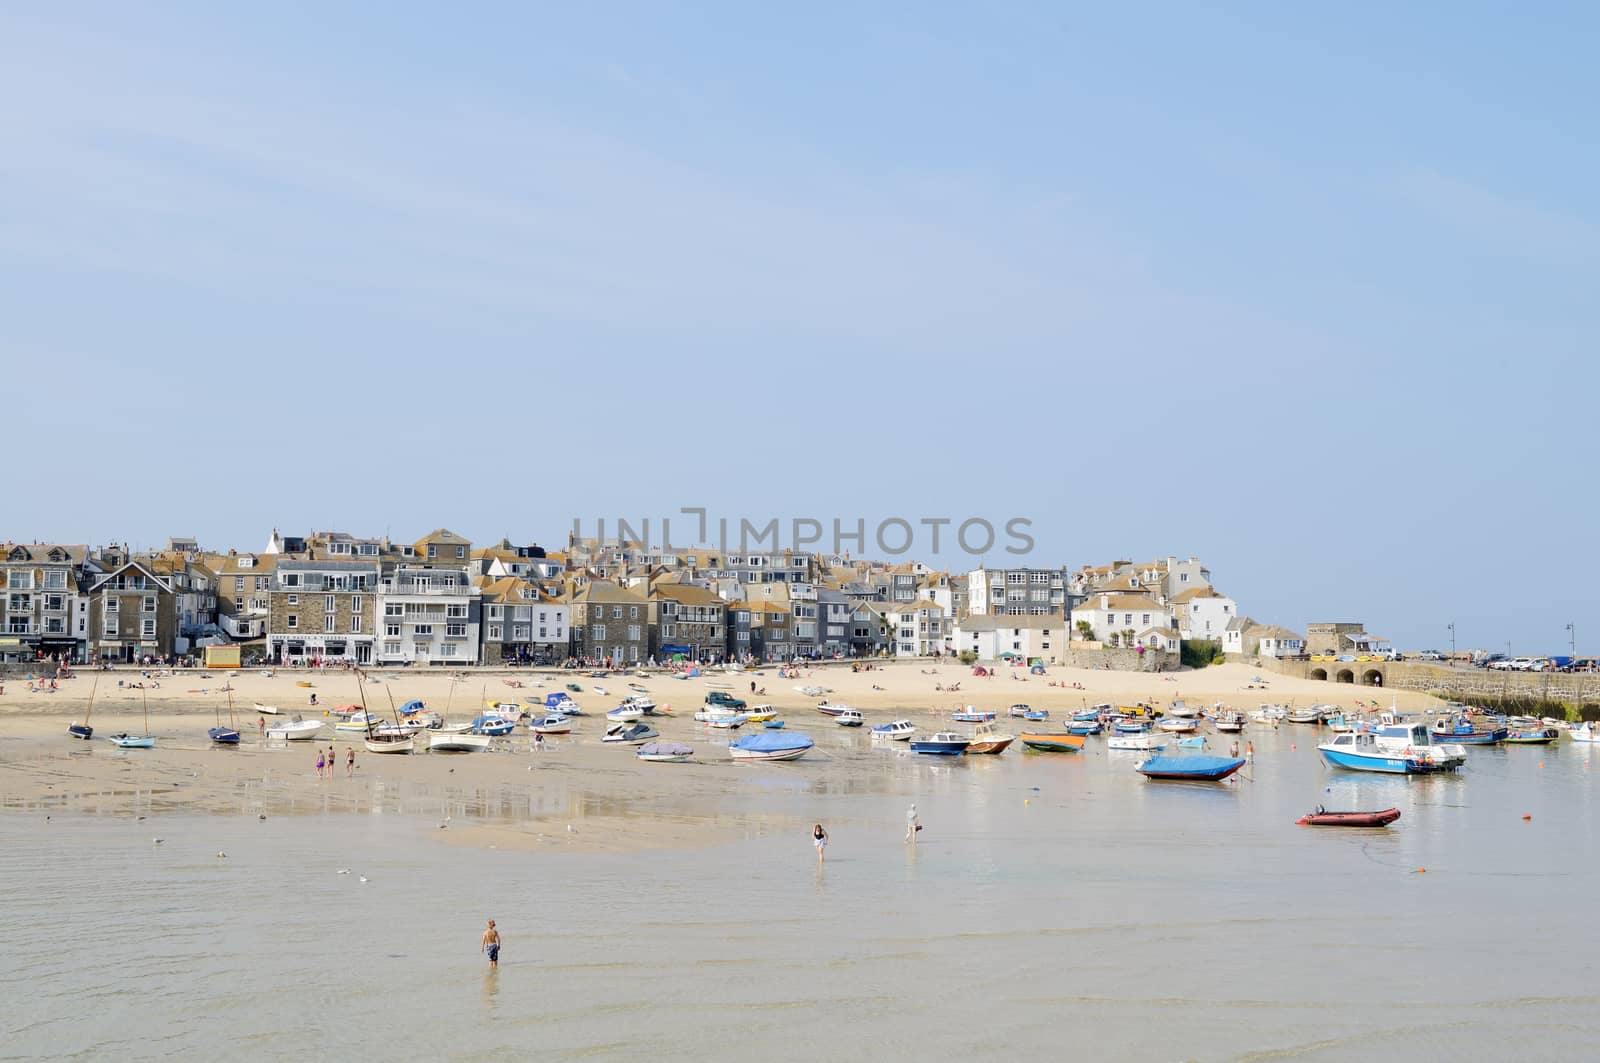 St Ives in Cornwall in the summer on a sunny day showing the beach and boats